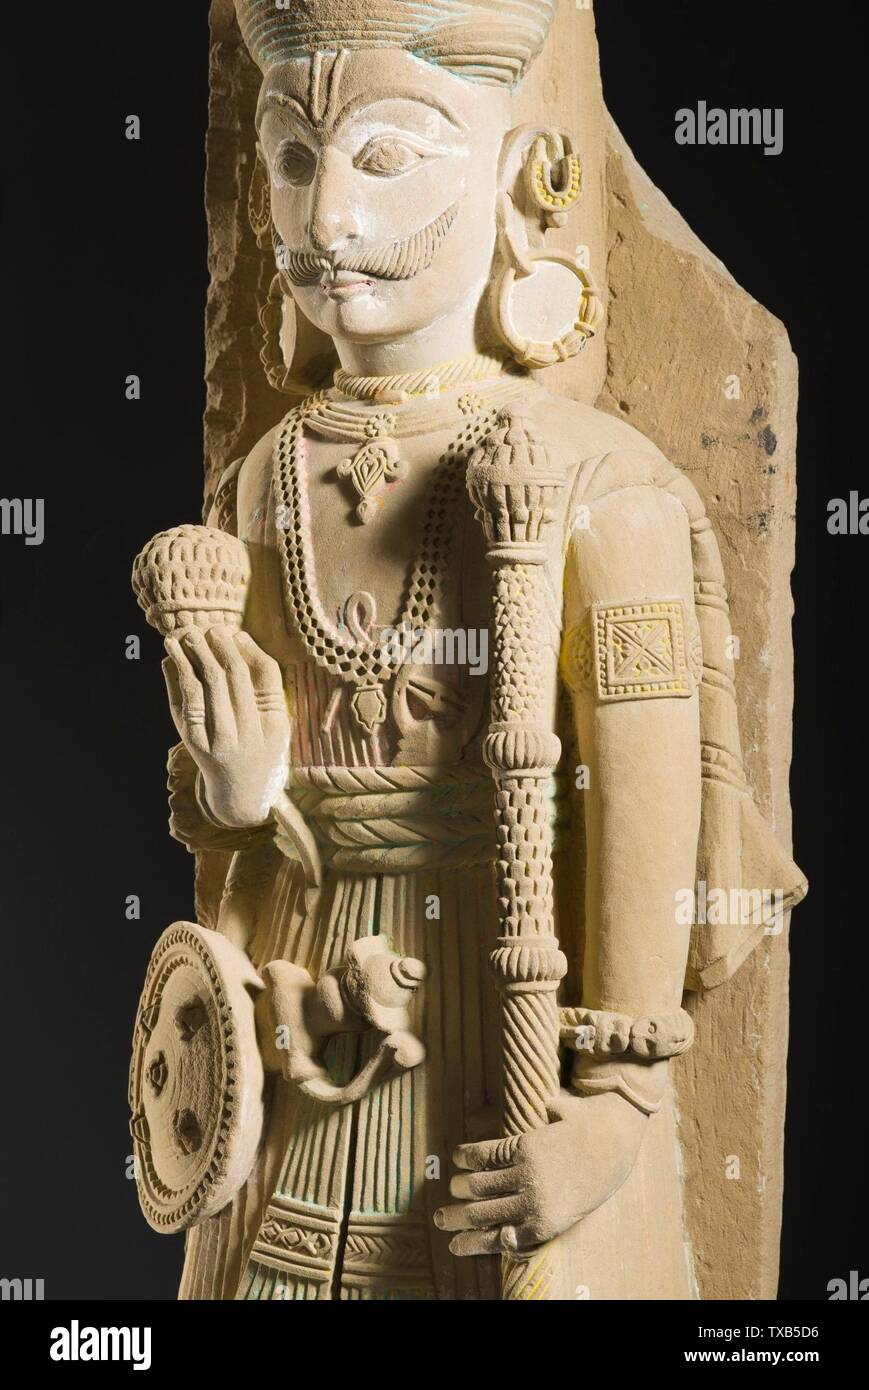 Palace Guardian (image 1 of 8);  India, Gujarat, Kachchh (Kutch) or Western Rajasthan, 18th century Sculpture Sandstone with traces of paint Gift of Subhash Kapoor in honor of Dr. Pratapaditya Pal (AC1995.151.1) South and Southeast Asian Art; 18th century date QS:P571,+1750-00-00T00:00:00Z/7; Stock Photo